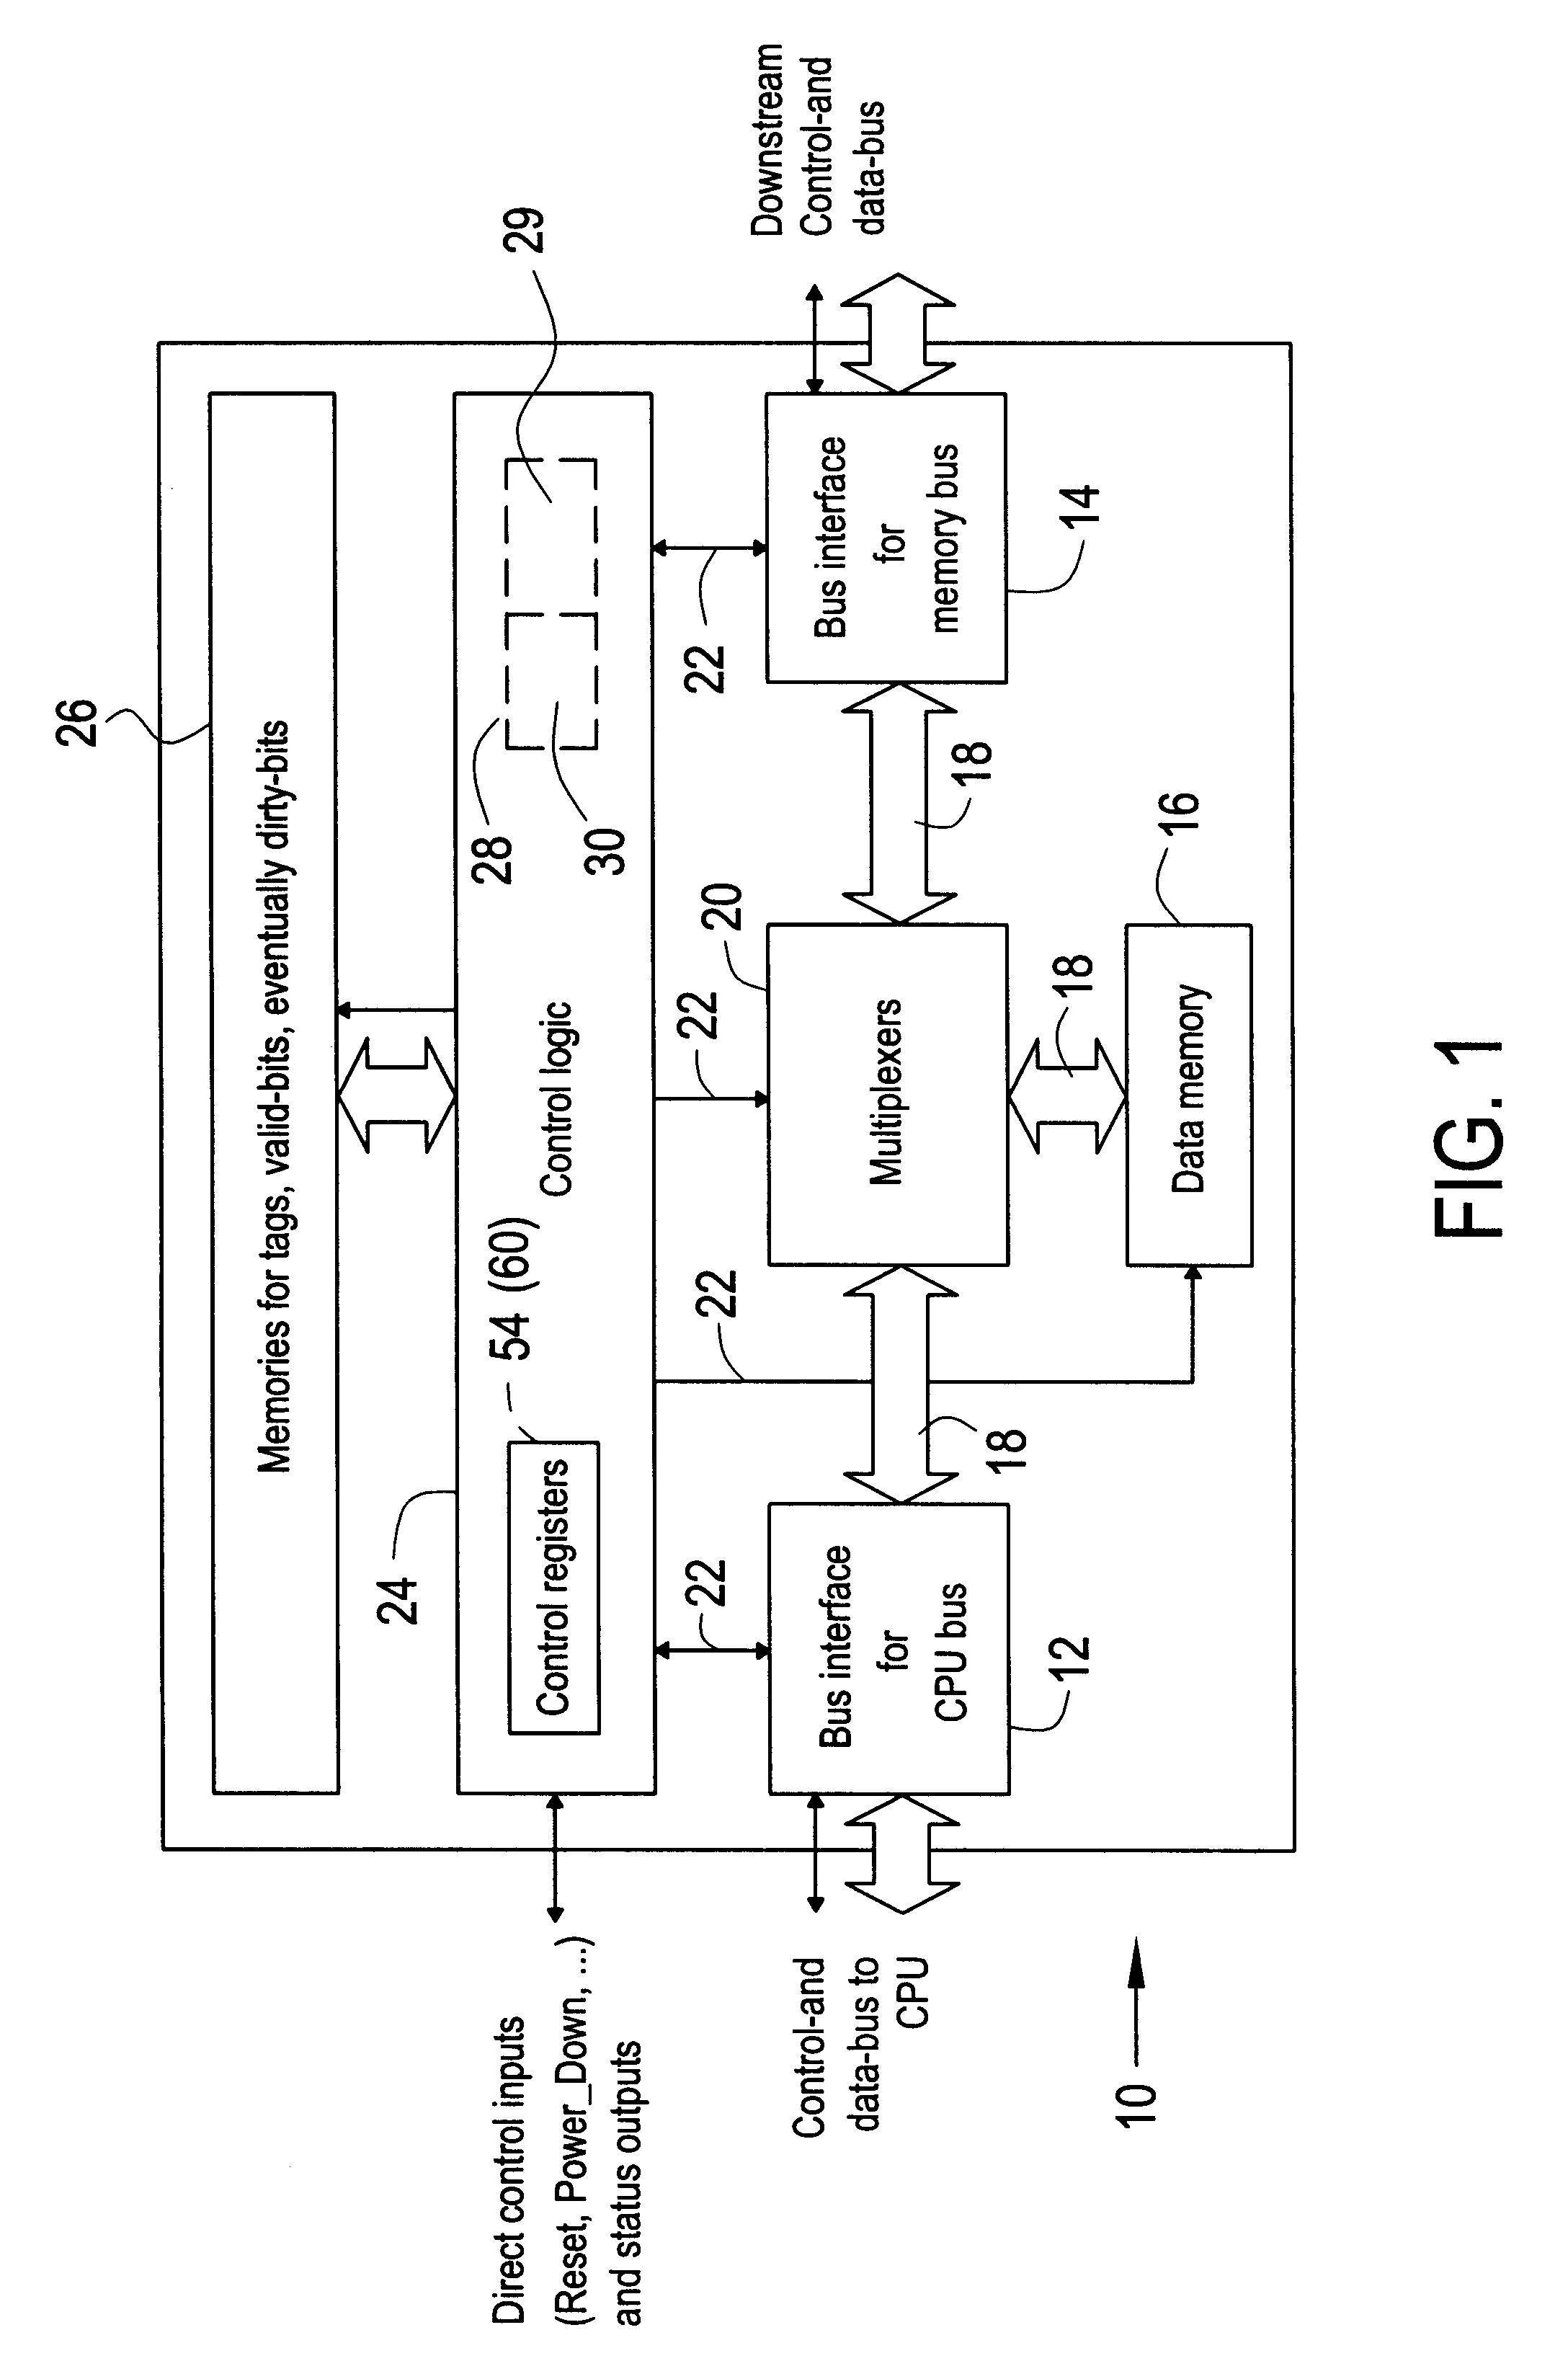 Random replacement generator for a cache circuit